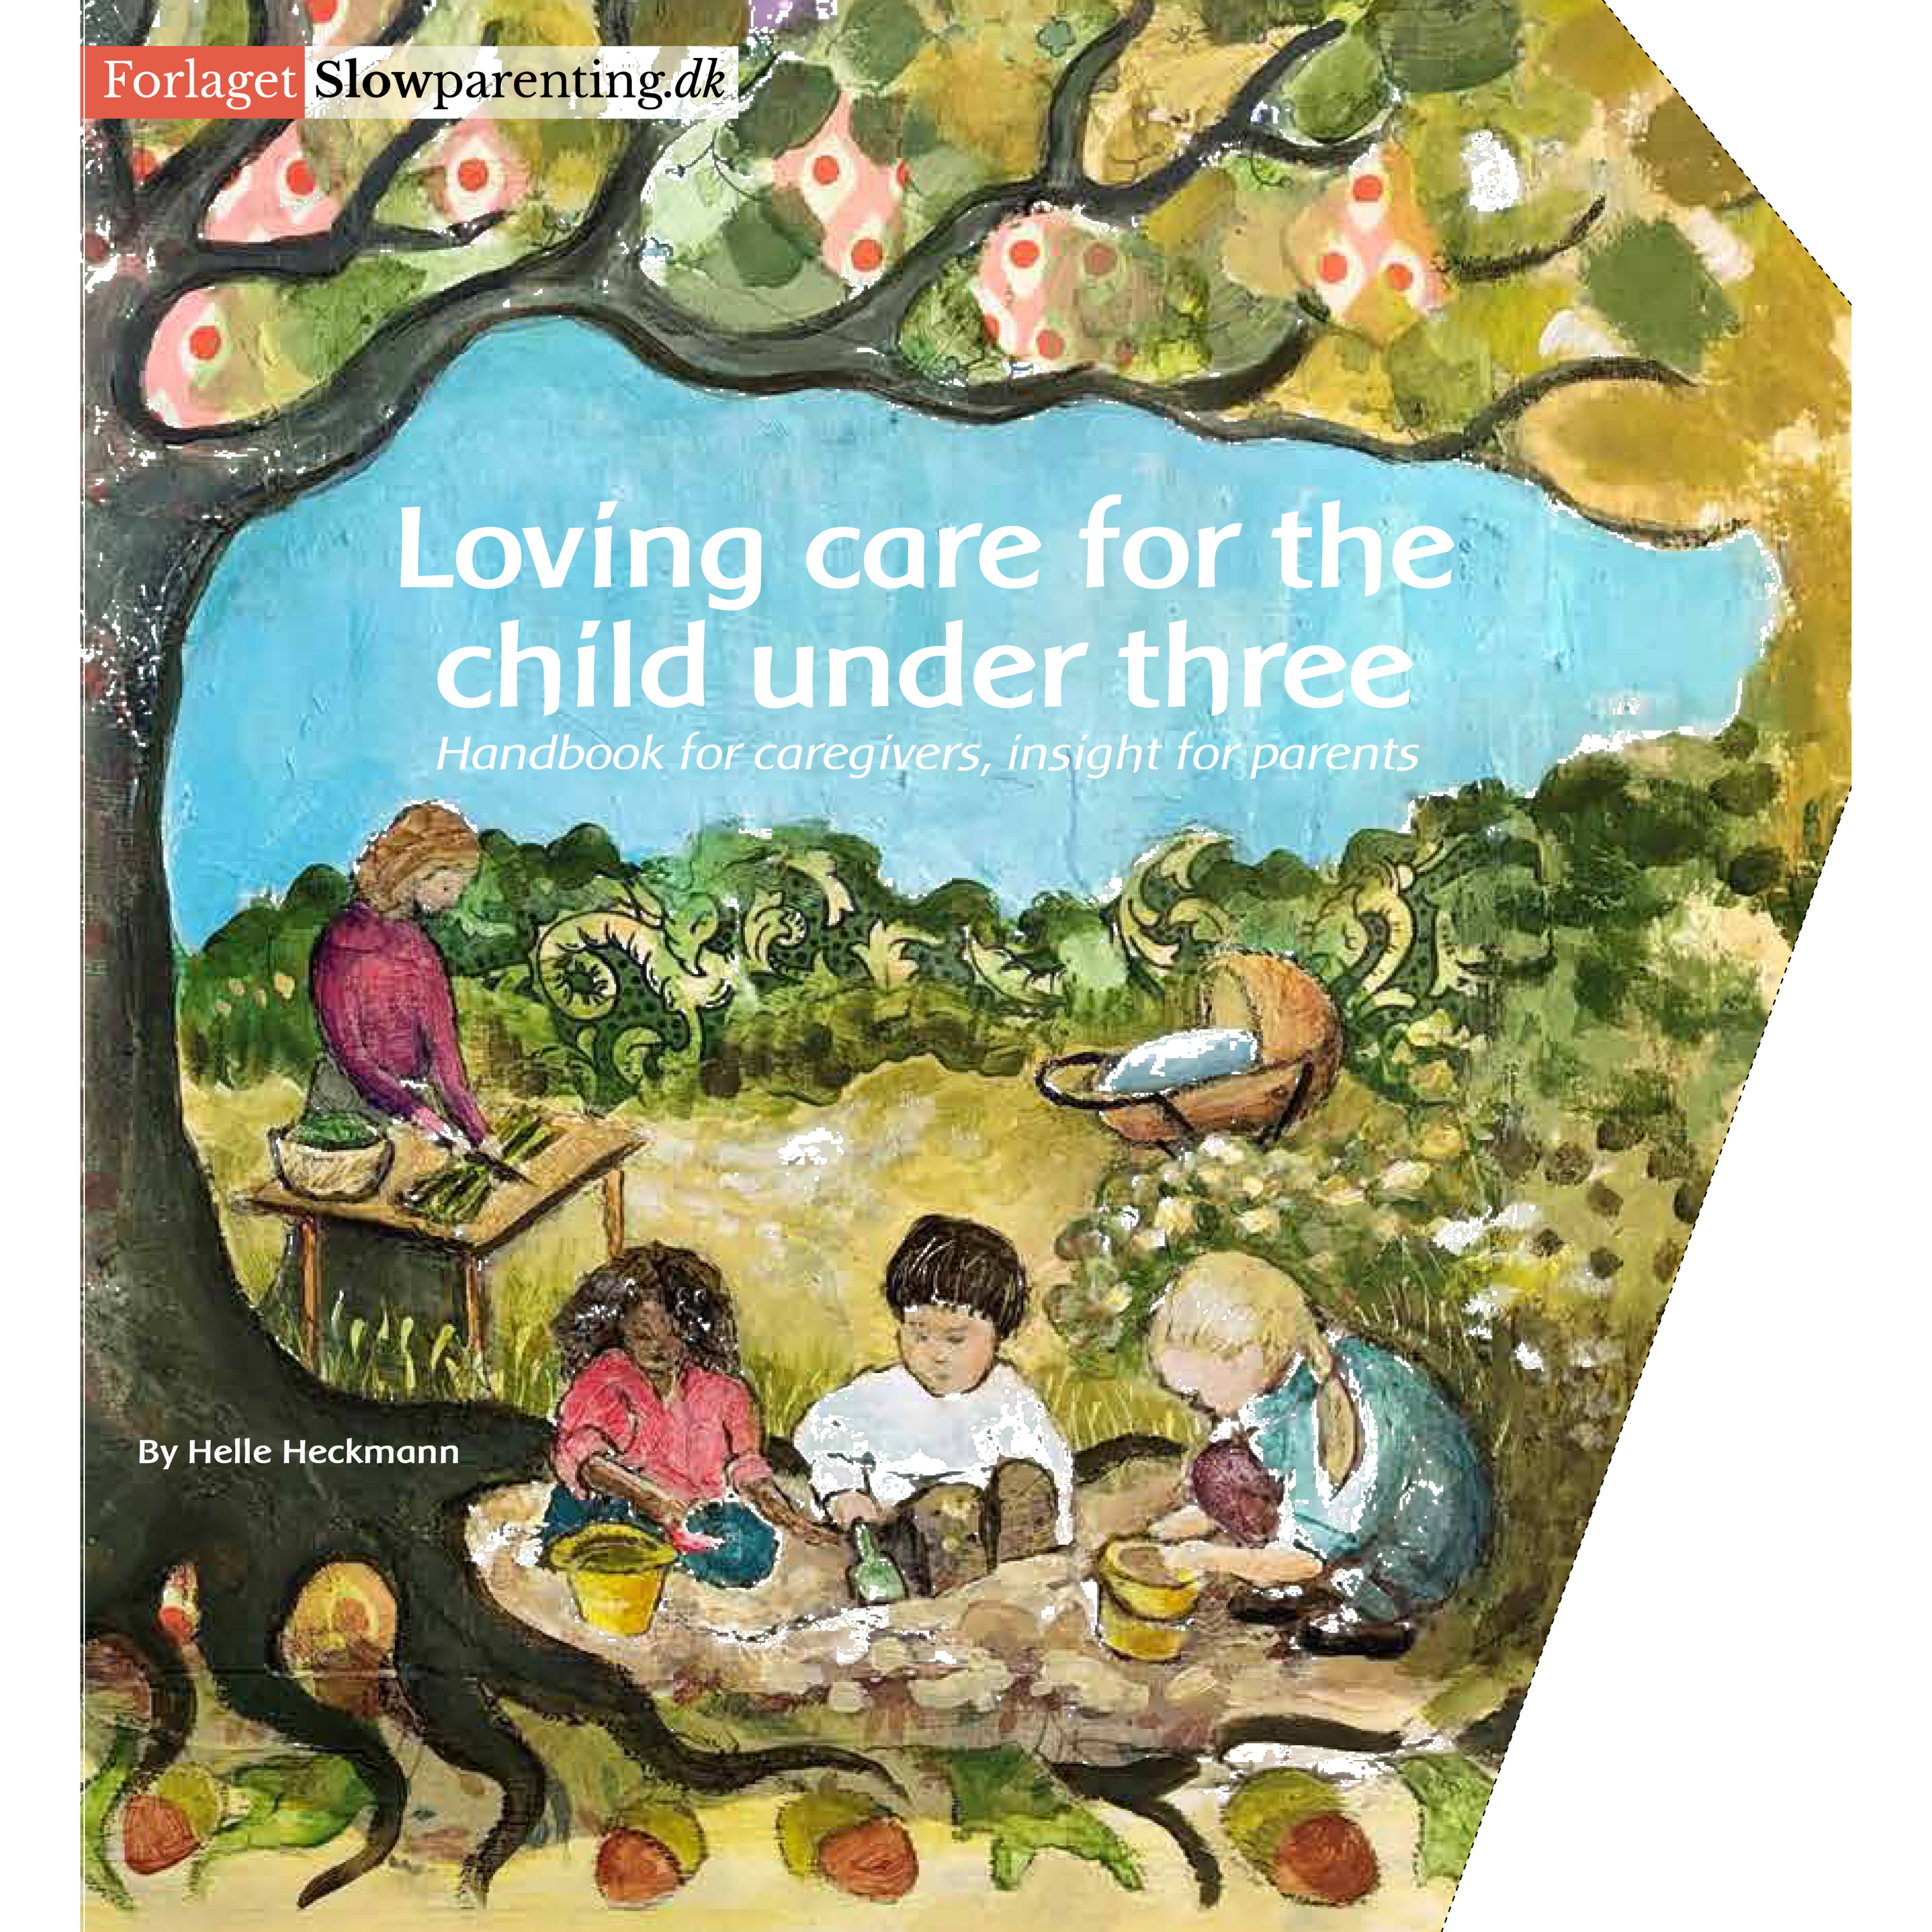 Loving Care for the Child Under Three by Helle Heckmann